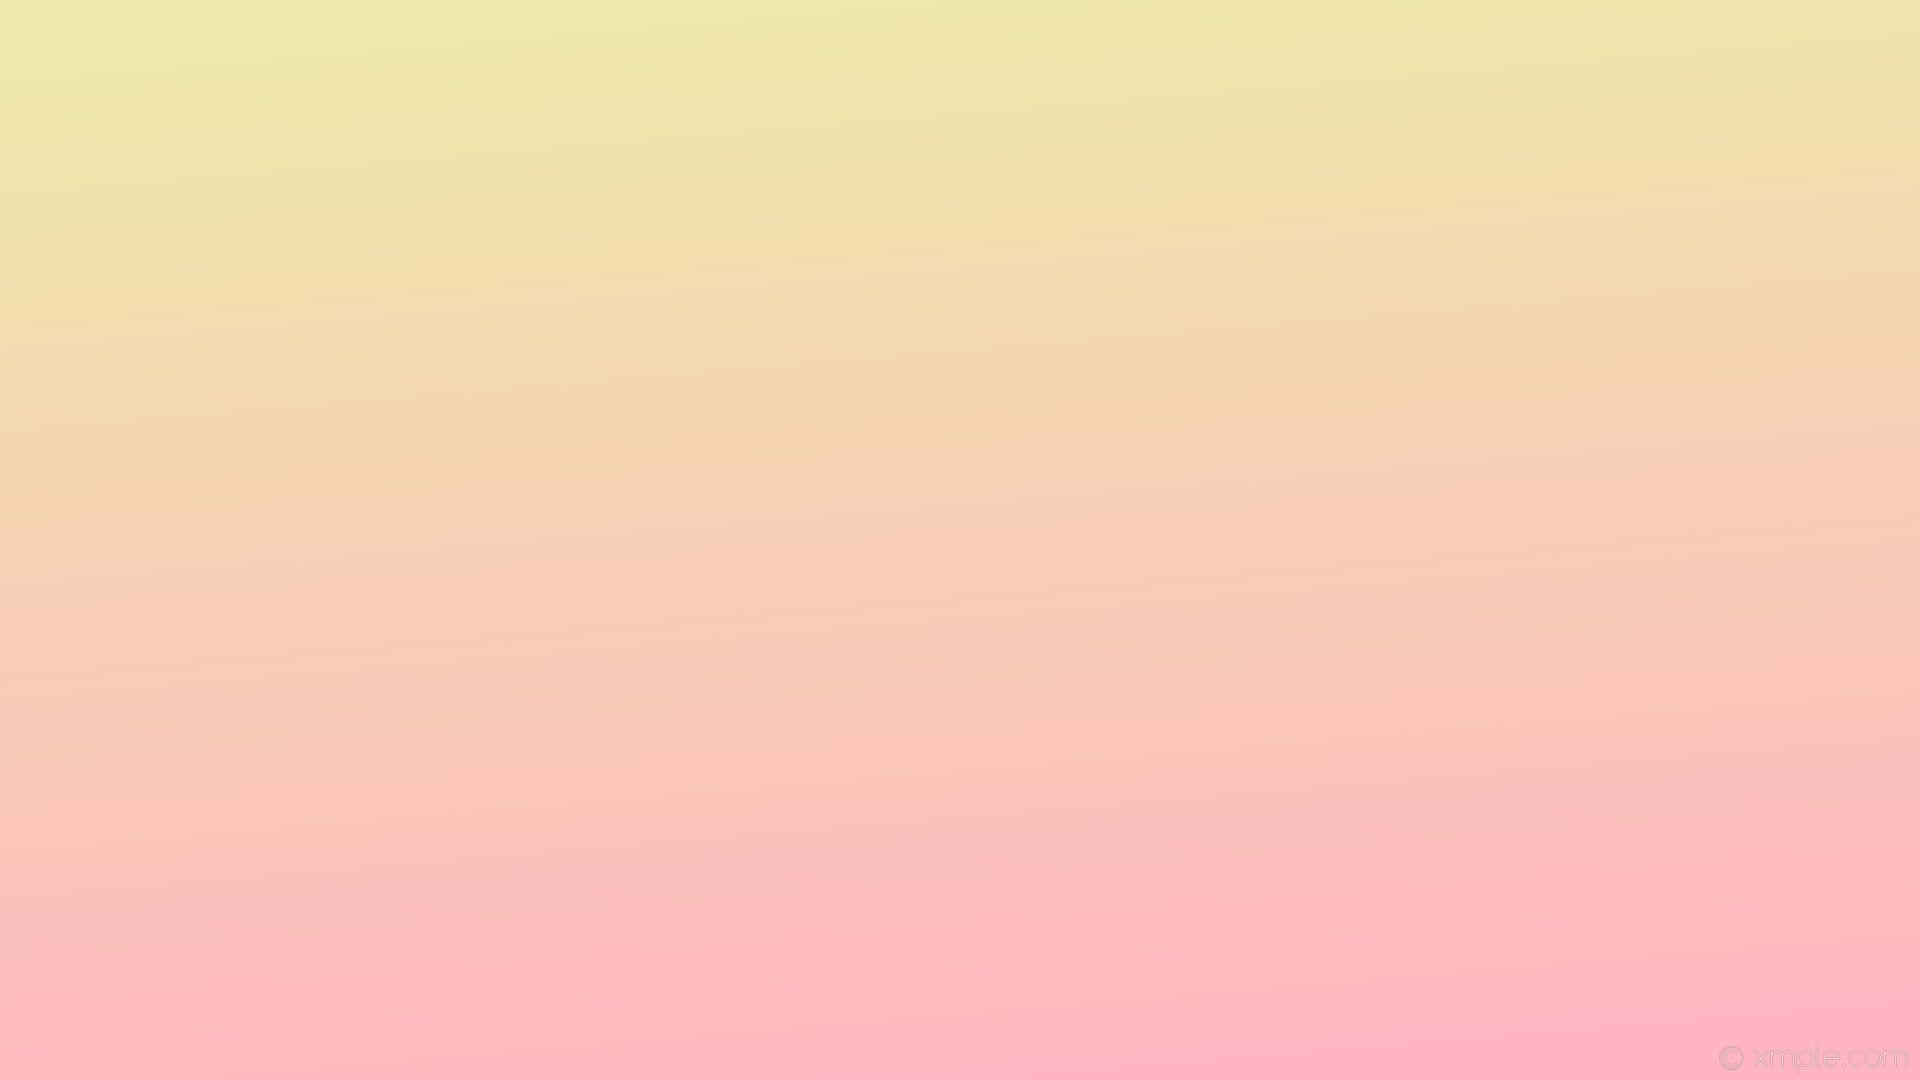 A Pastel Pink and Yellow Patterned Background Wallpaper